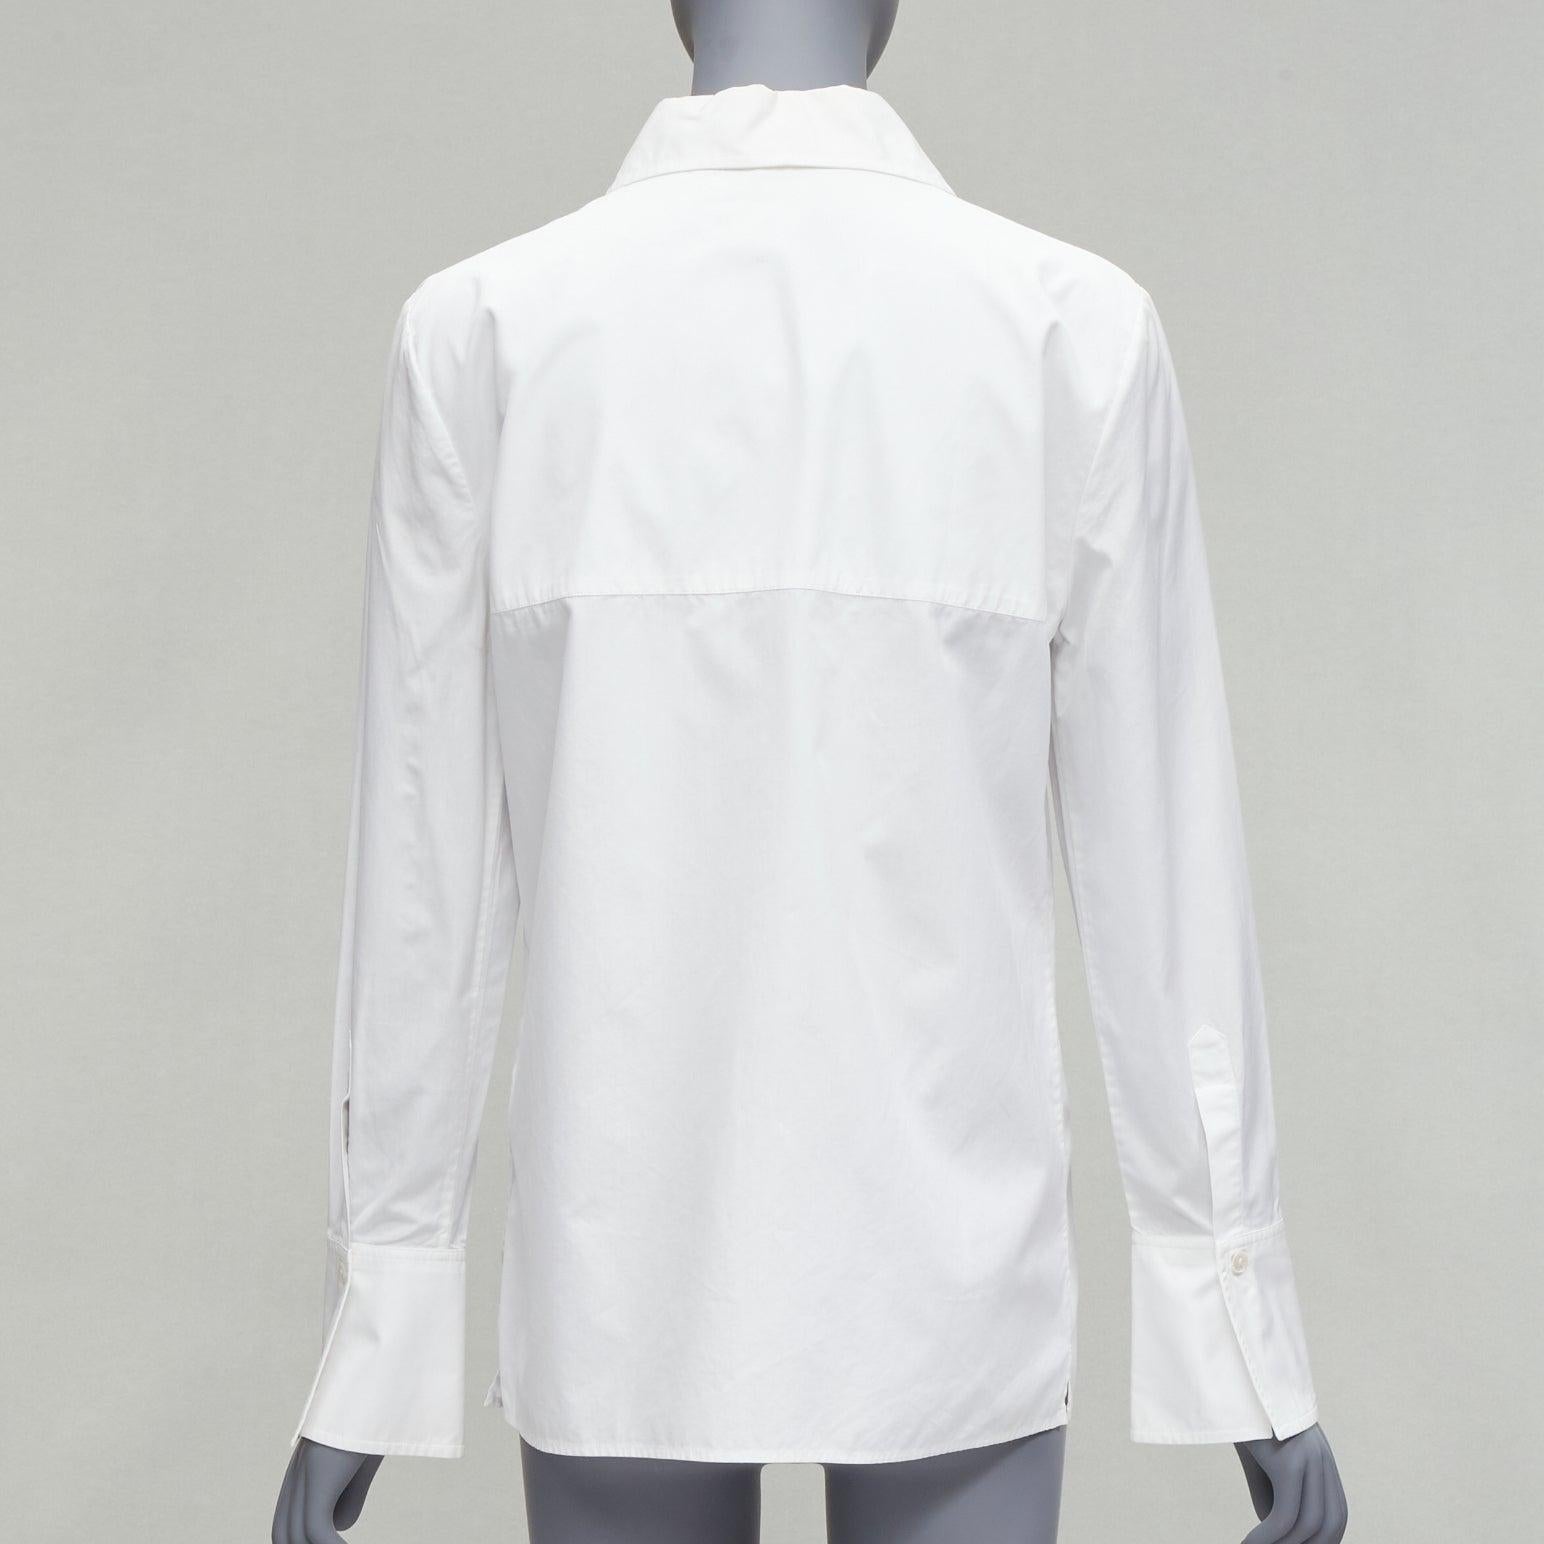 GUCCI Vintage white minimal wide collar angular bust dart panelled dress shirt IT40 S
Reference: CNPG/A00031
Brand: Gucci
Designer: Tom Ford
Material: Feels like cotton
Color: White
Pattern: Solid
Closure: Button
Extra Details: Bust darts enhances